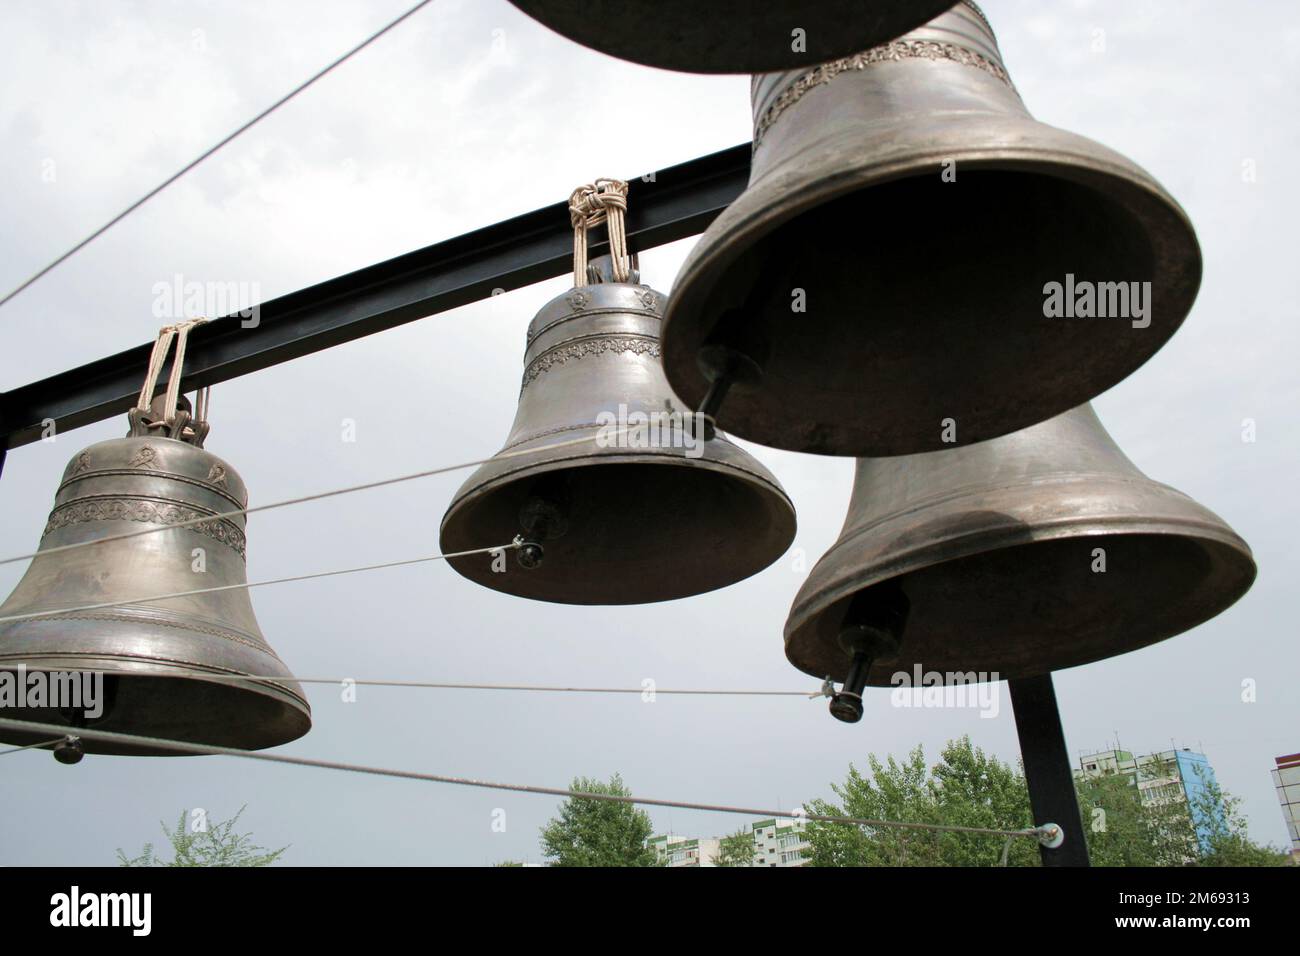 The Bells | The New Yorker